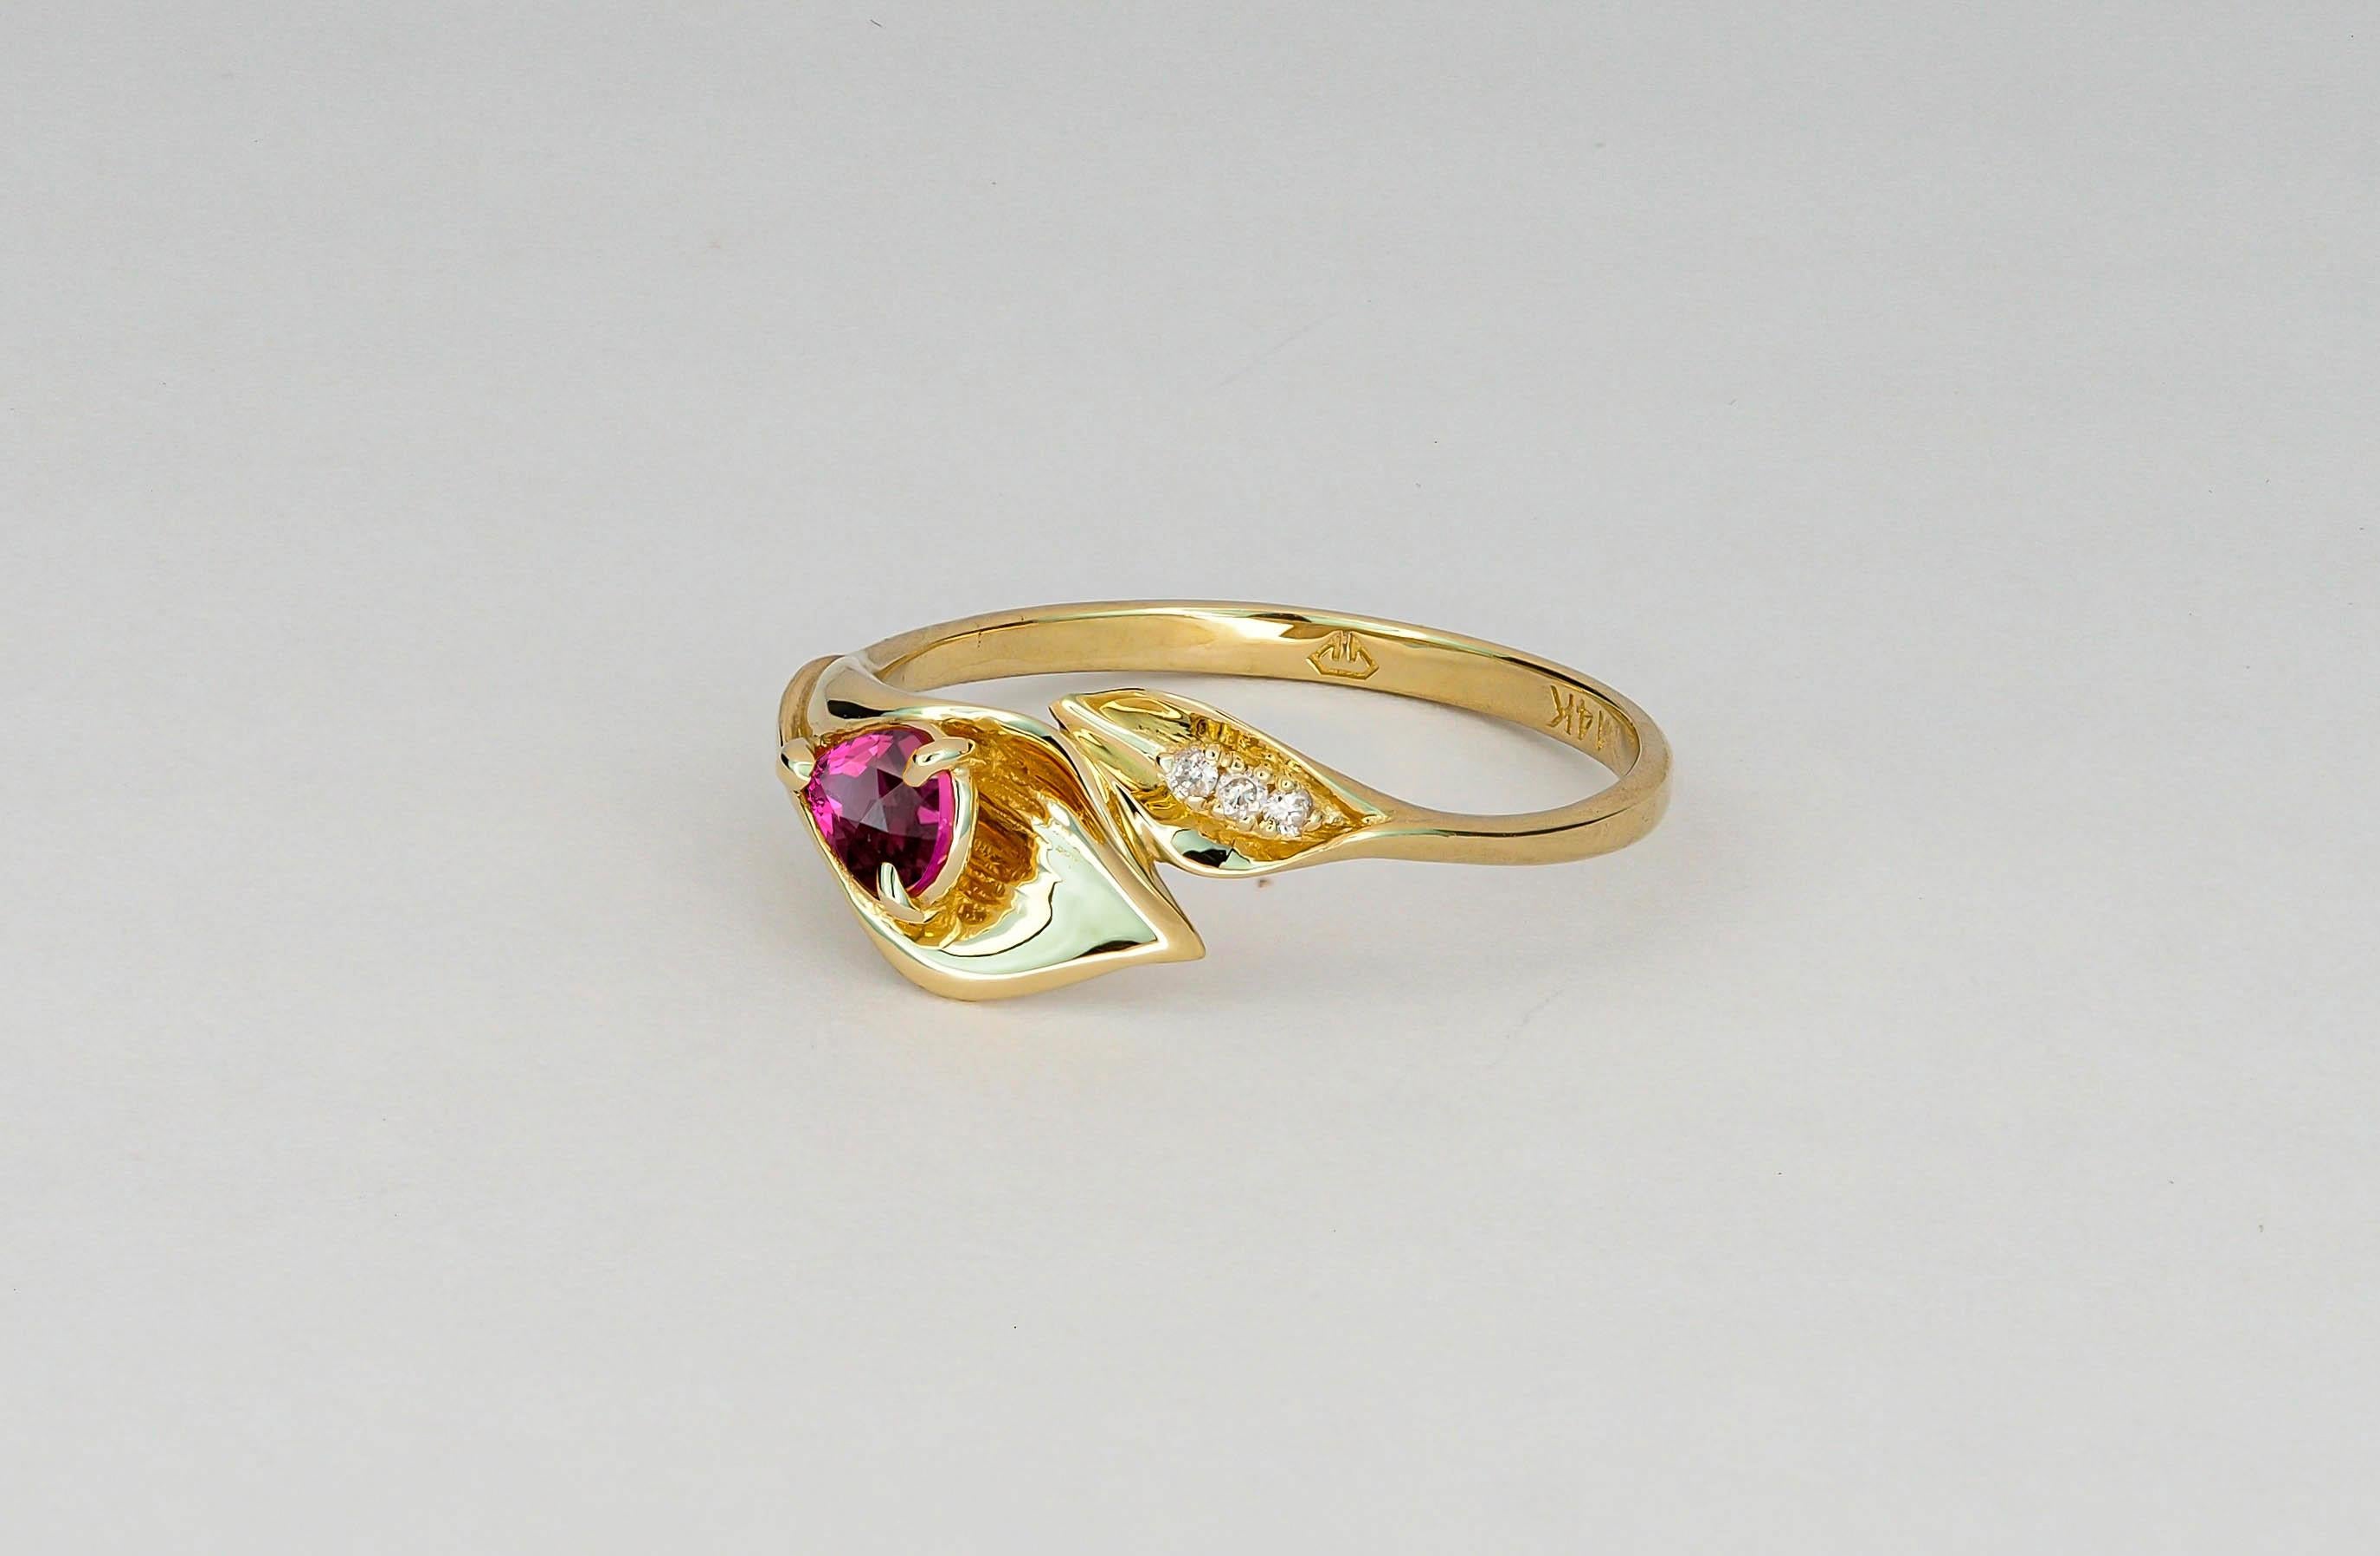 For Sale:  Lily Calla Gold Ring, 14 Karat Gold Ring with Garnet and Diamonds 4